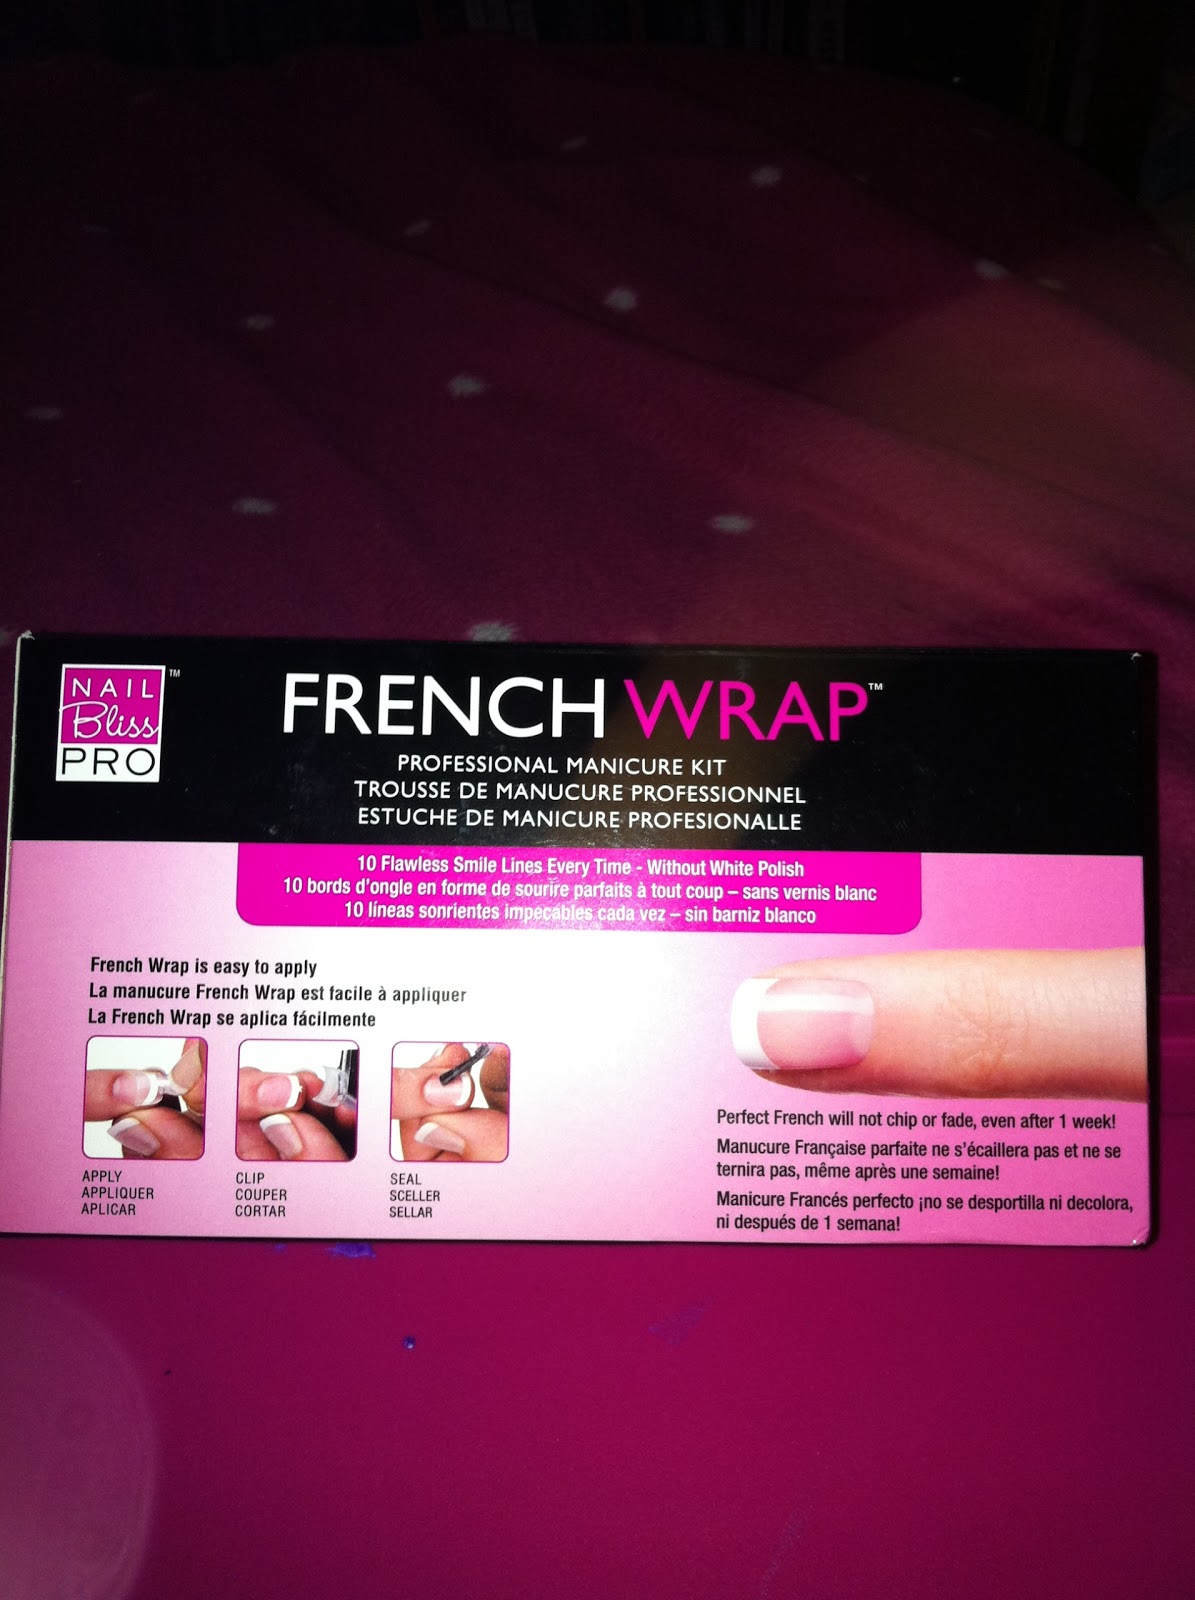 product by Nail Bliss Pro called French Wrap Professional Manicure Kit